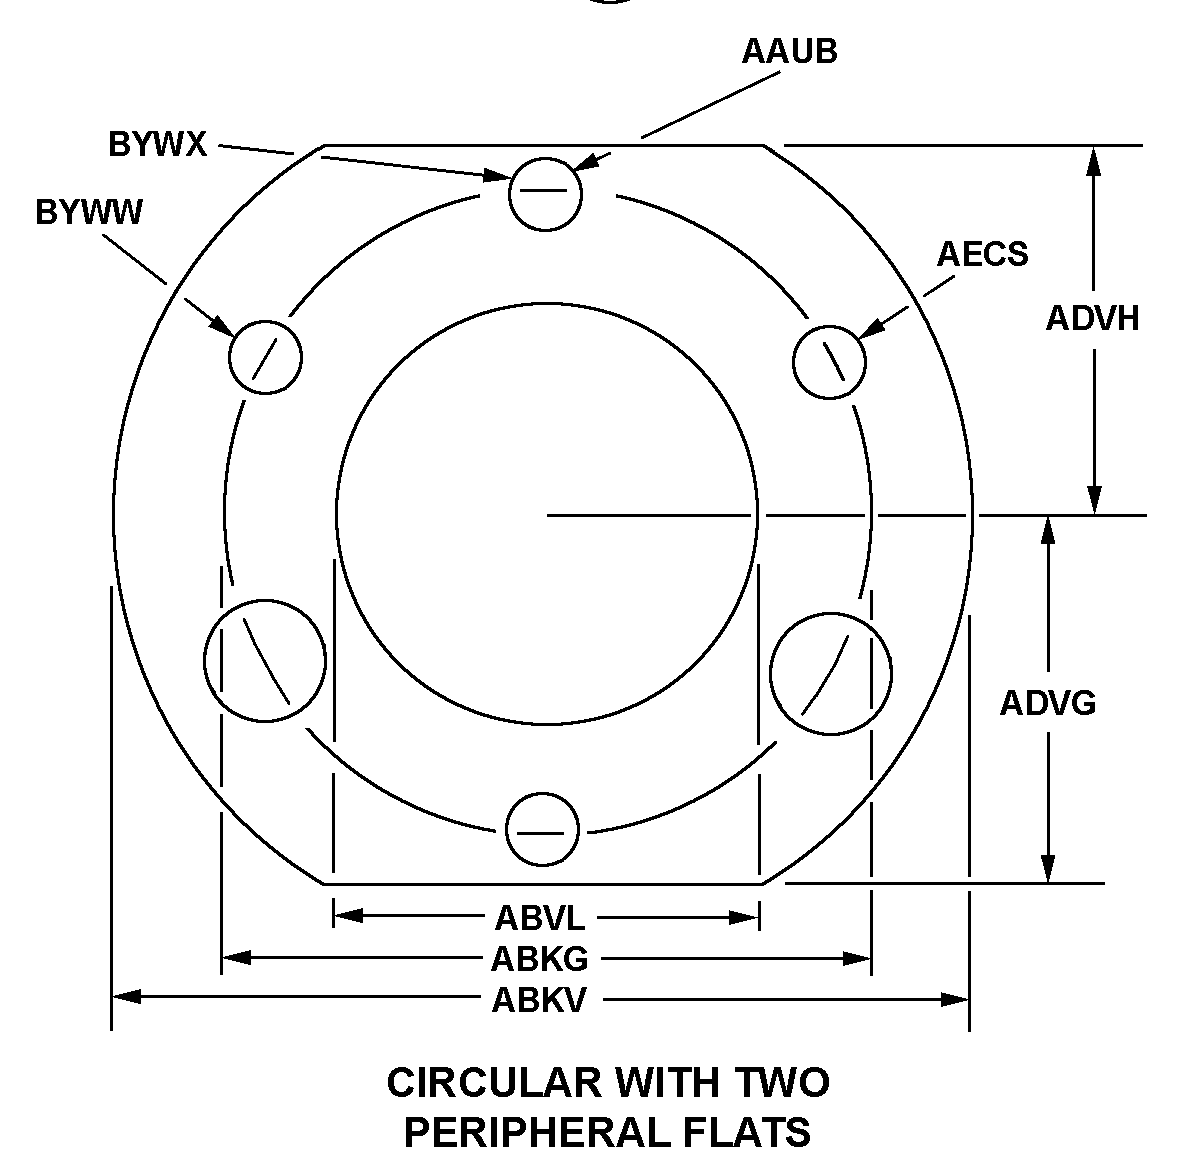 CIRCULAR WITH TWO PERIPHERAL FLATS style nsn 5330-00-285-9600